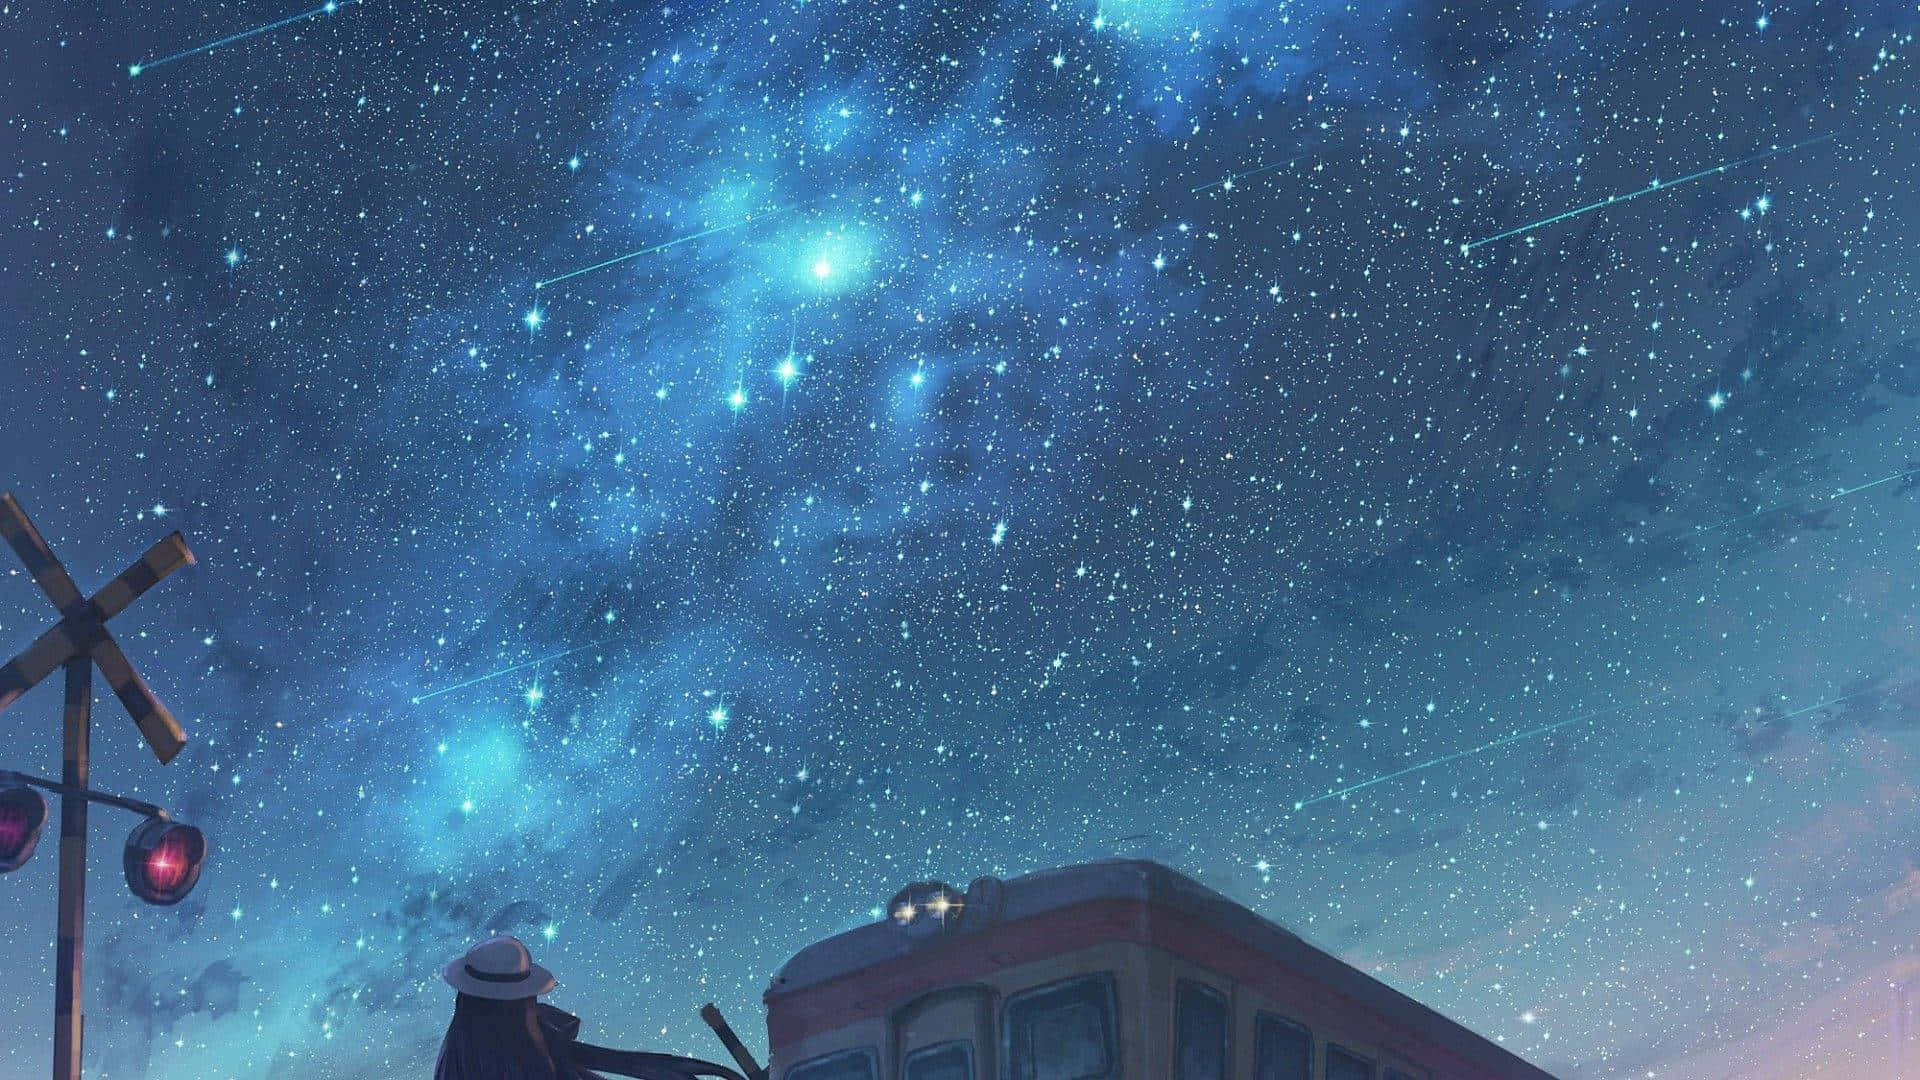 Night Anime Sky Filled With Shooting Stars Wallpaper